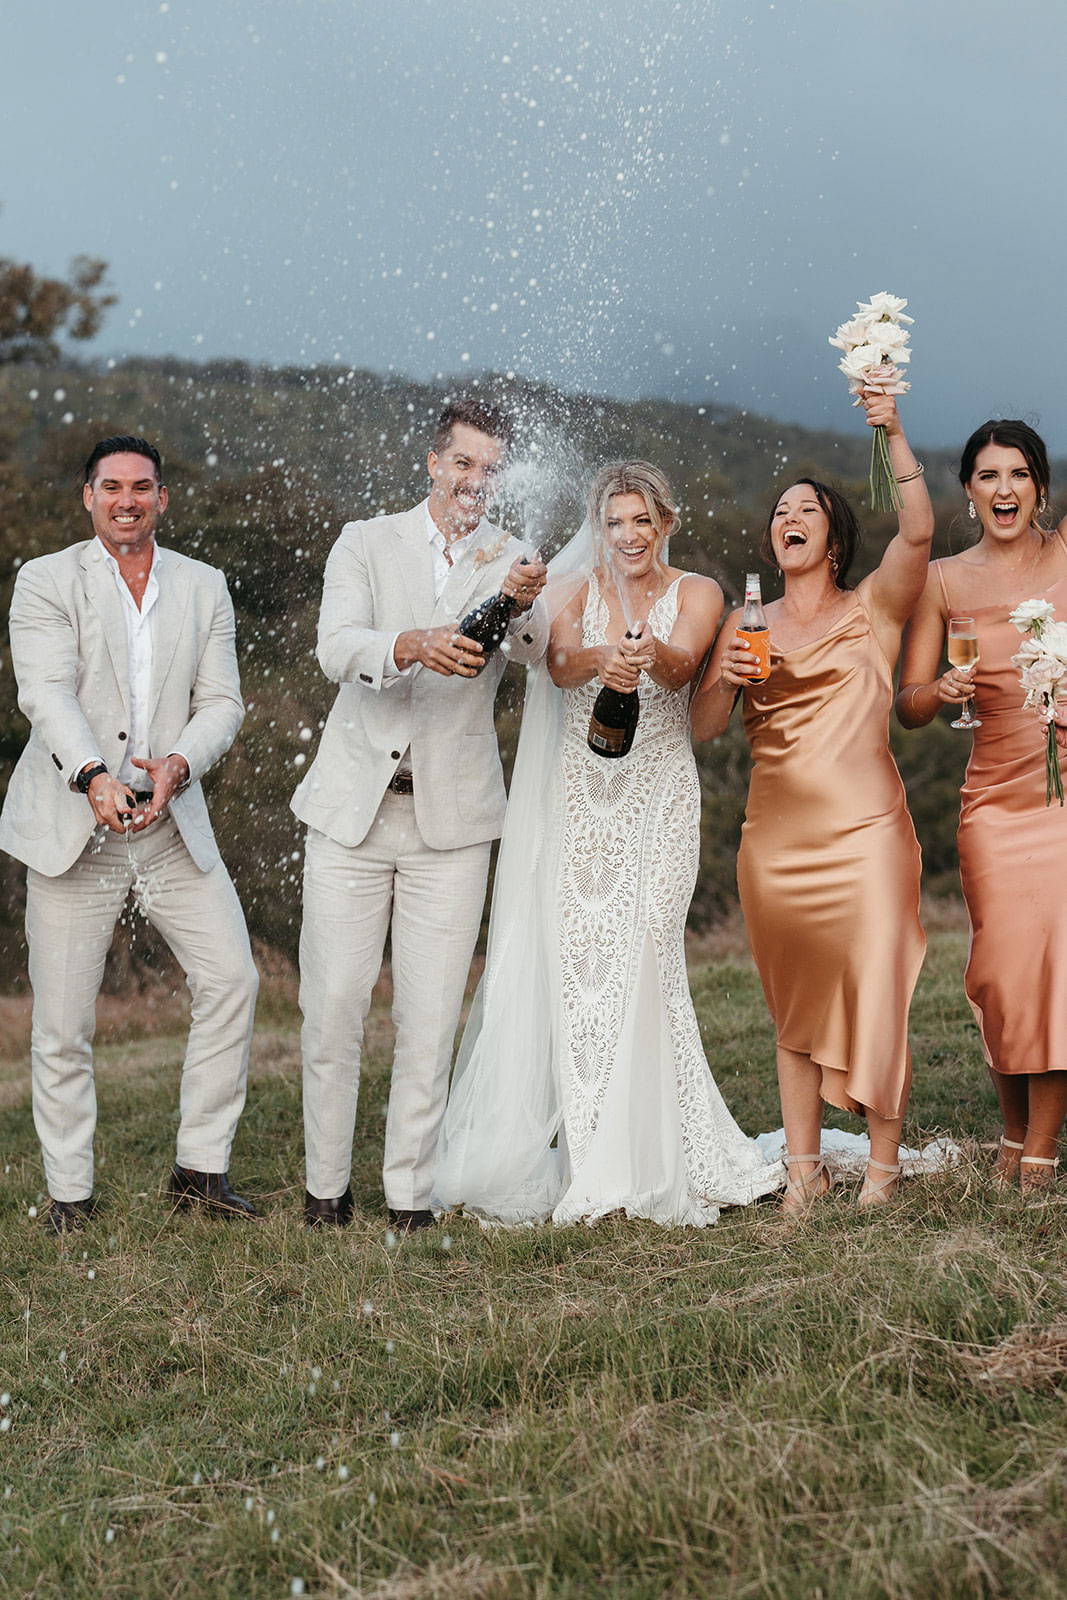 Bridal party celebrating with champagne